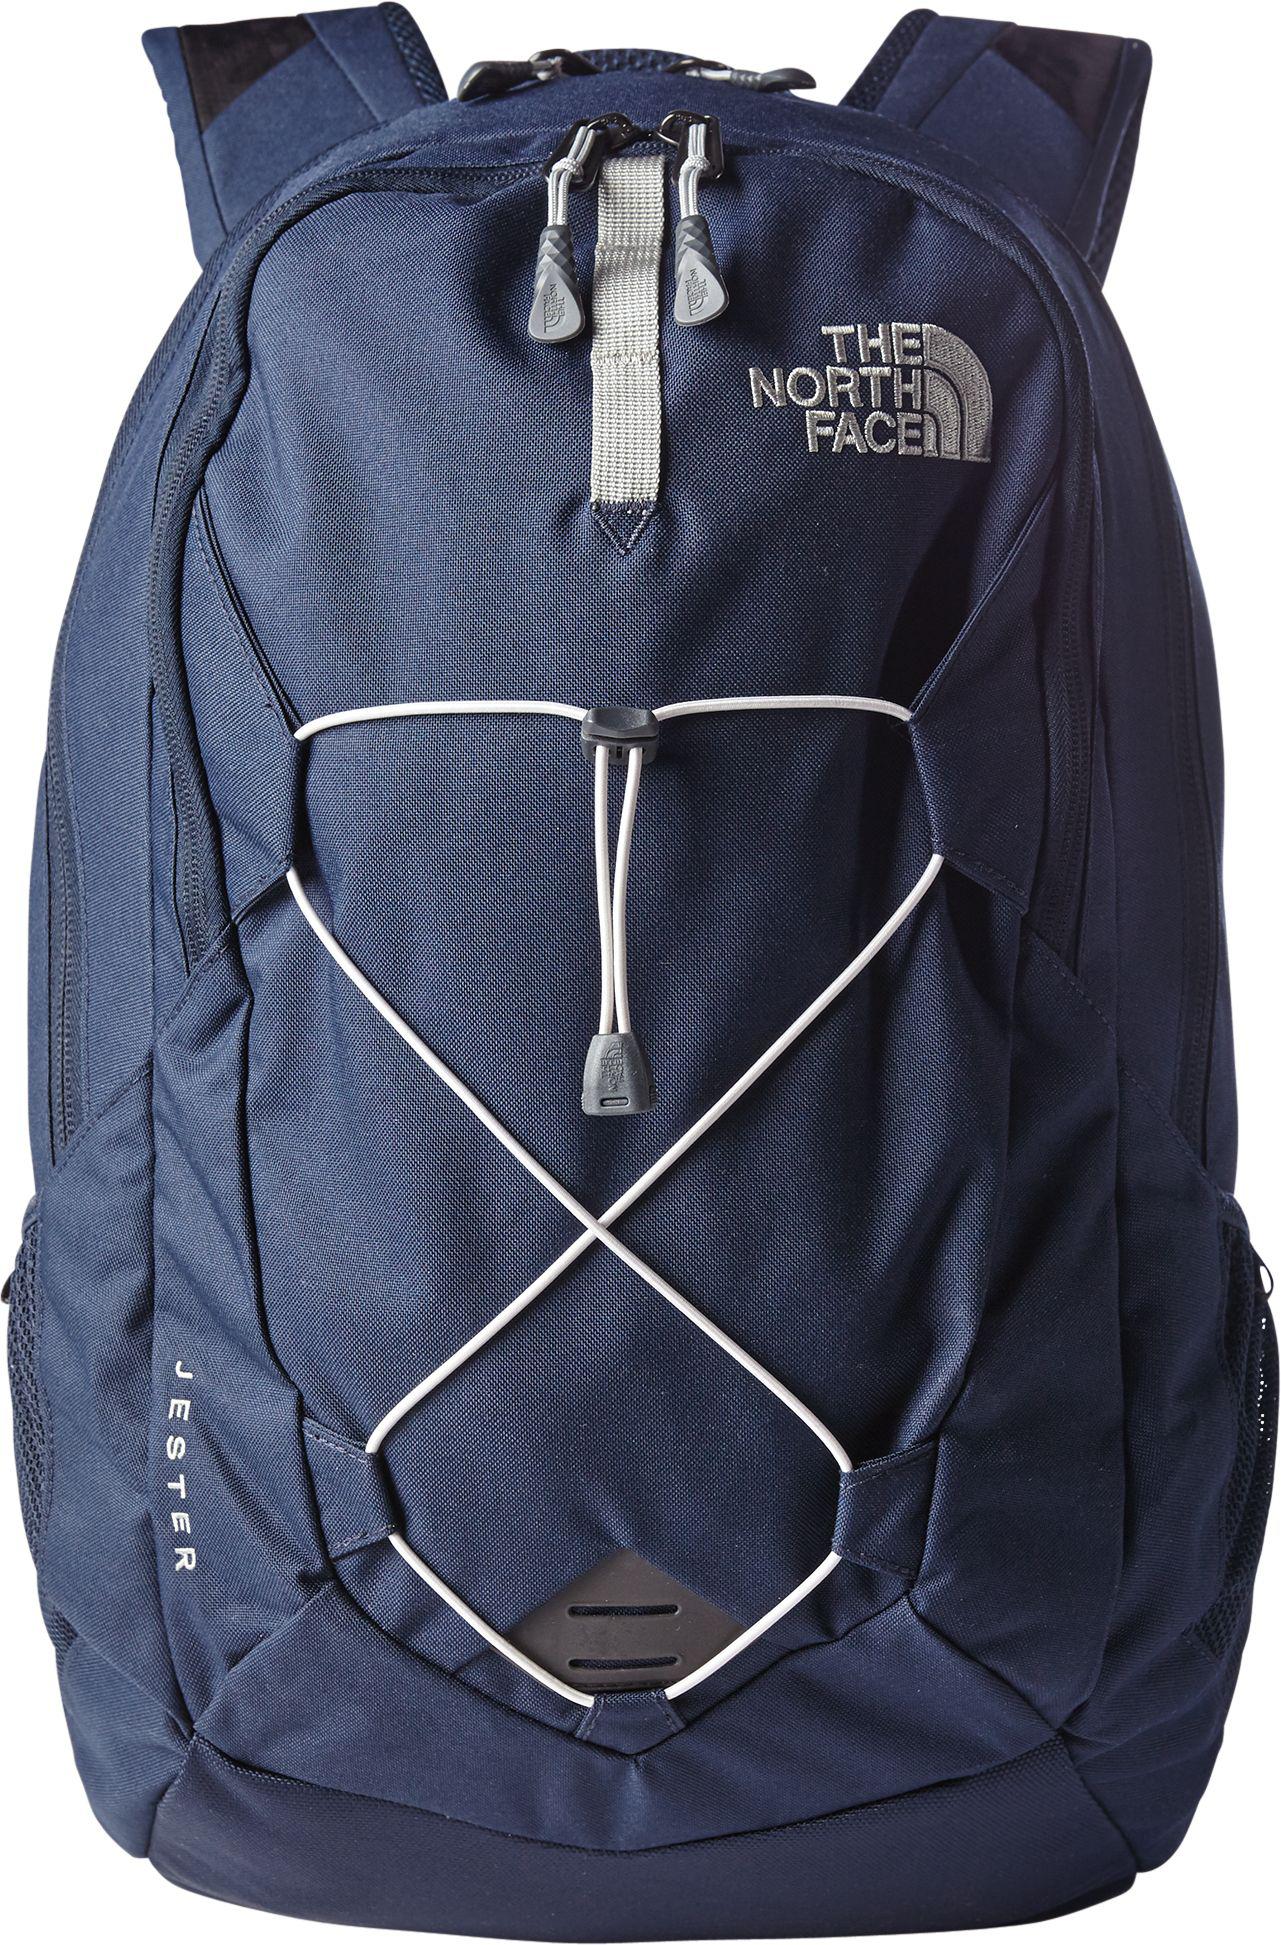 north face jester navy